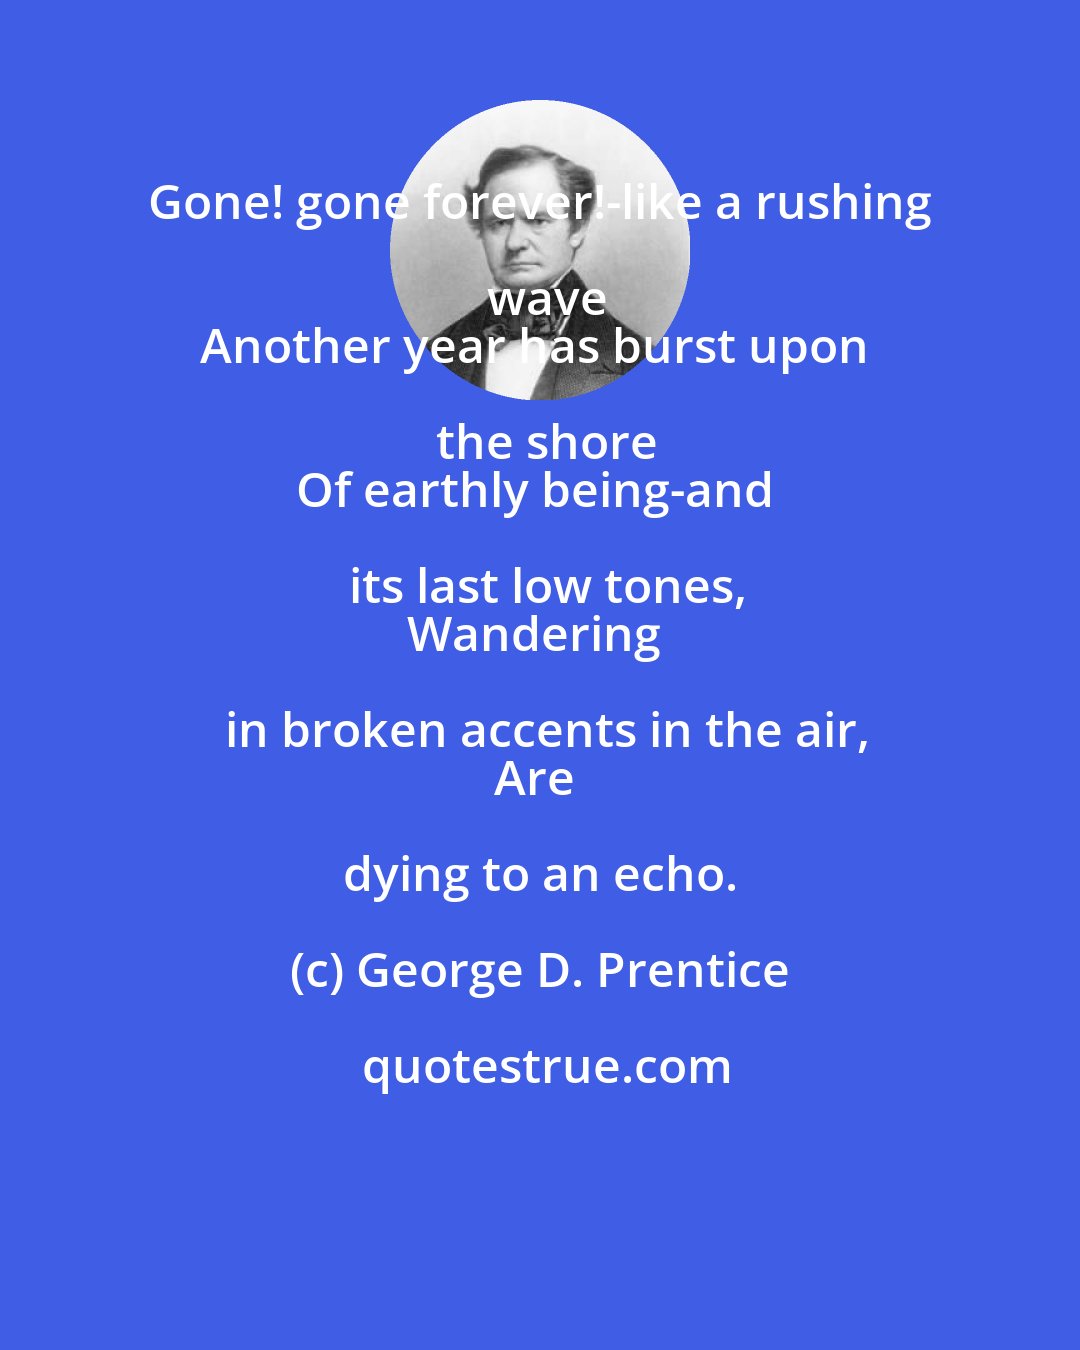 George D. Prentice: Gone! gone forever!-like a rushing wave
Another year has burst upon the shore
Of earthly being-and its last low tones,
Wandering in broken accents in the air,
Are dying to an echo.